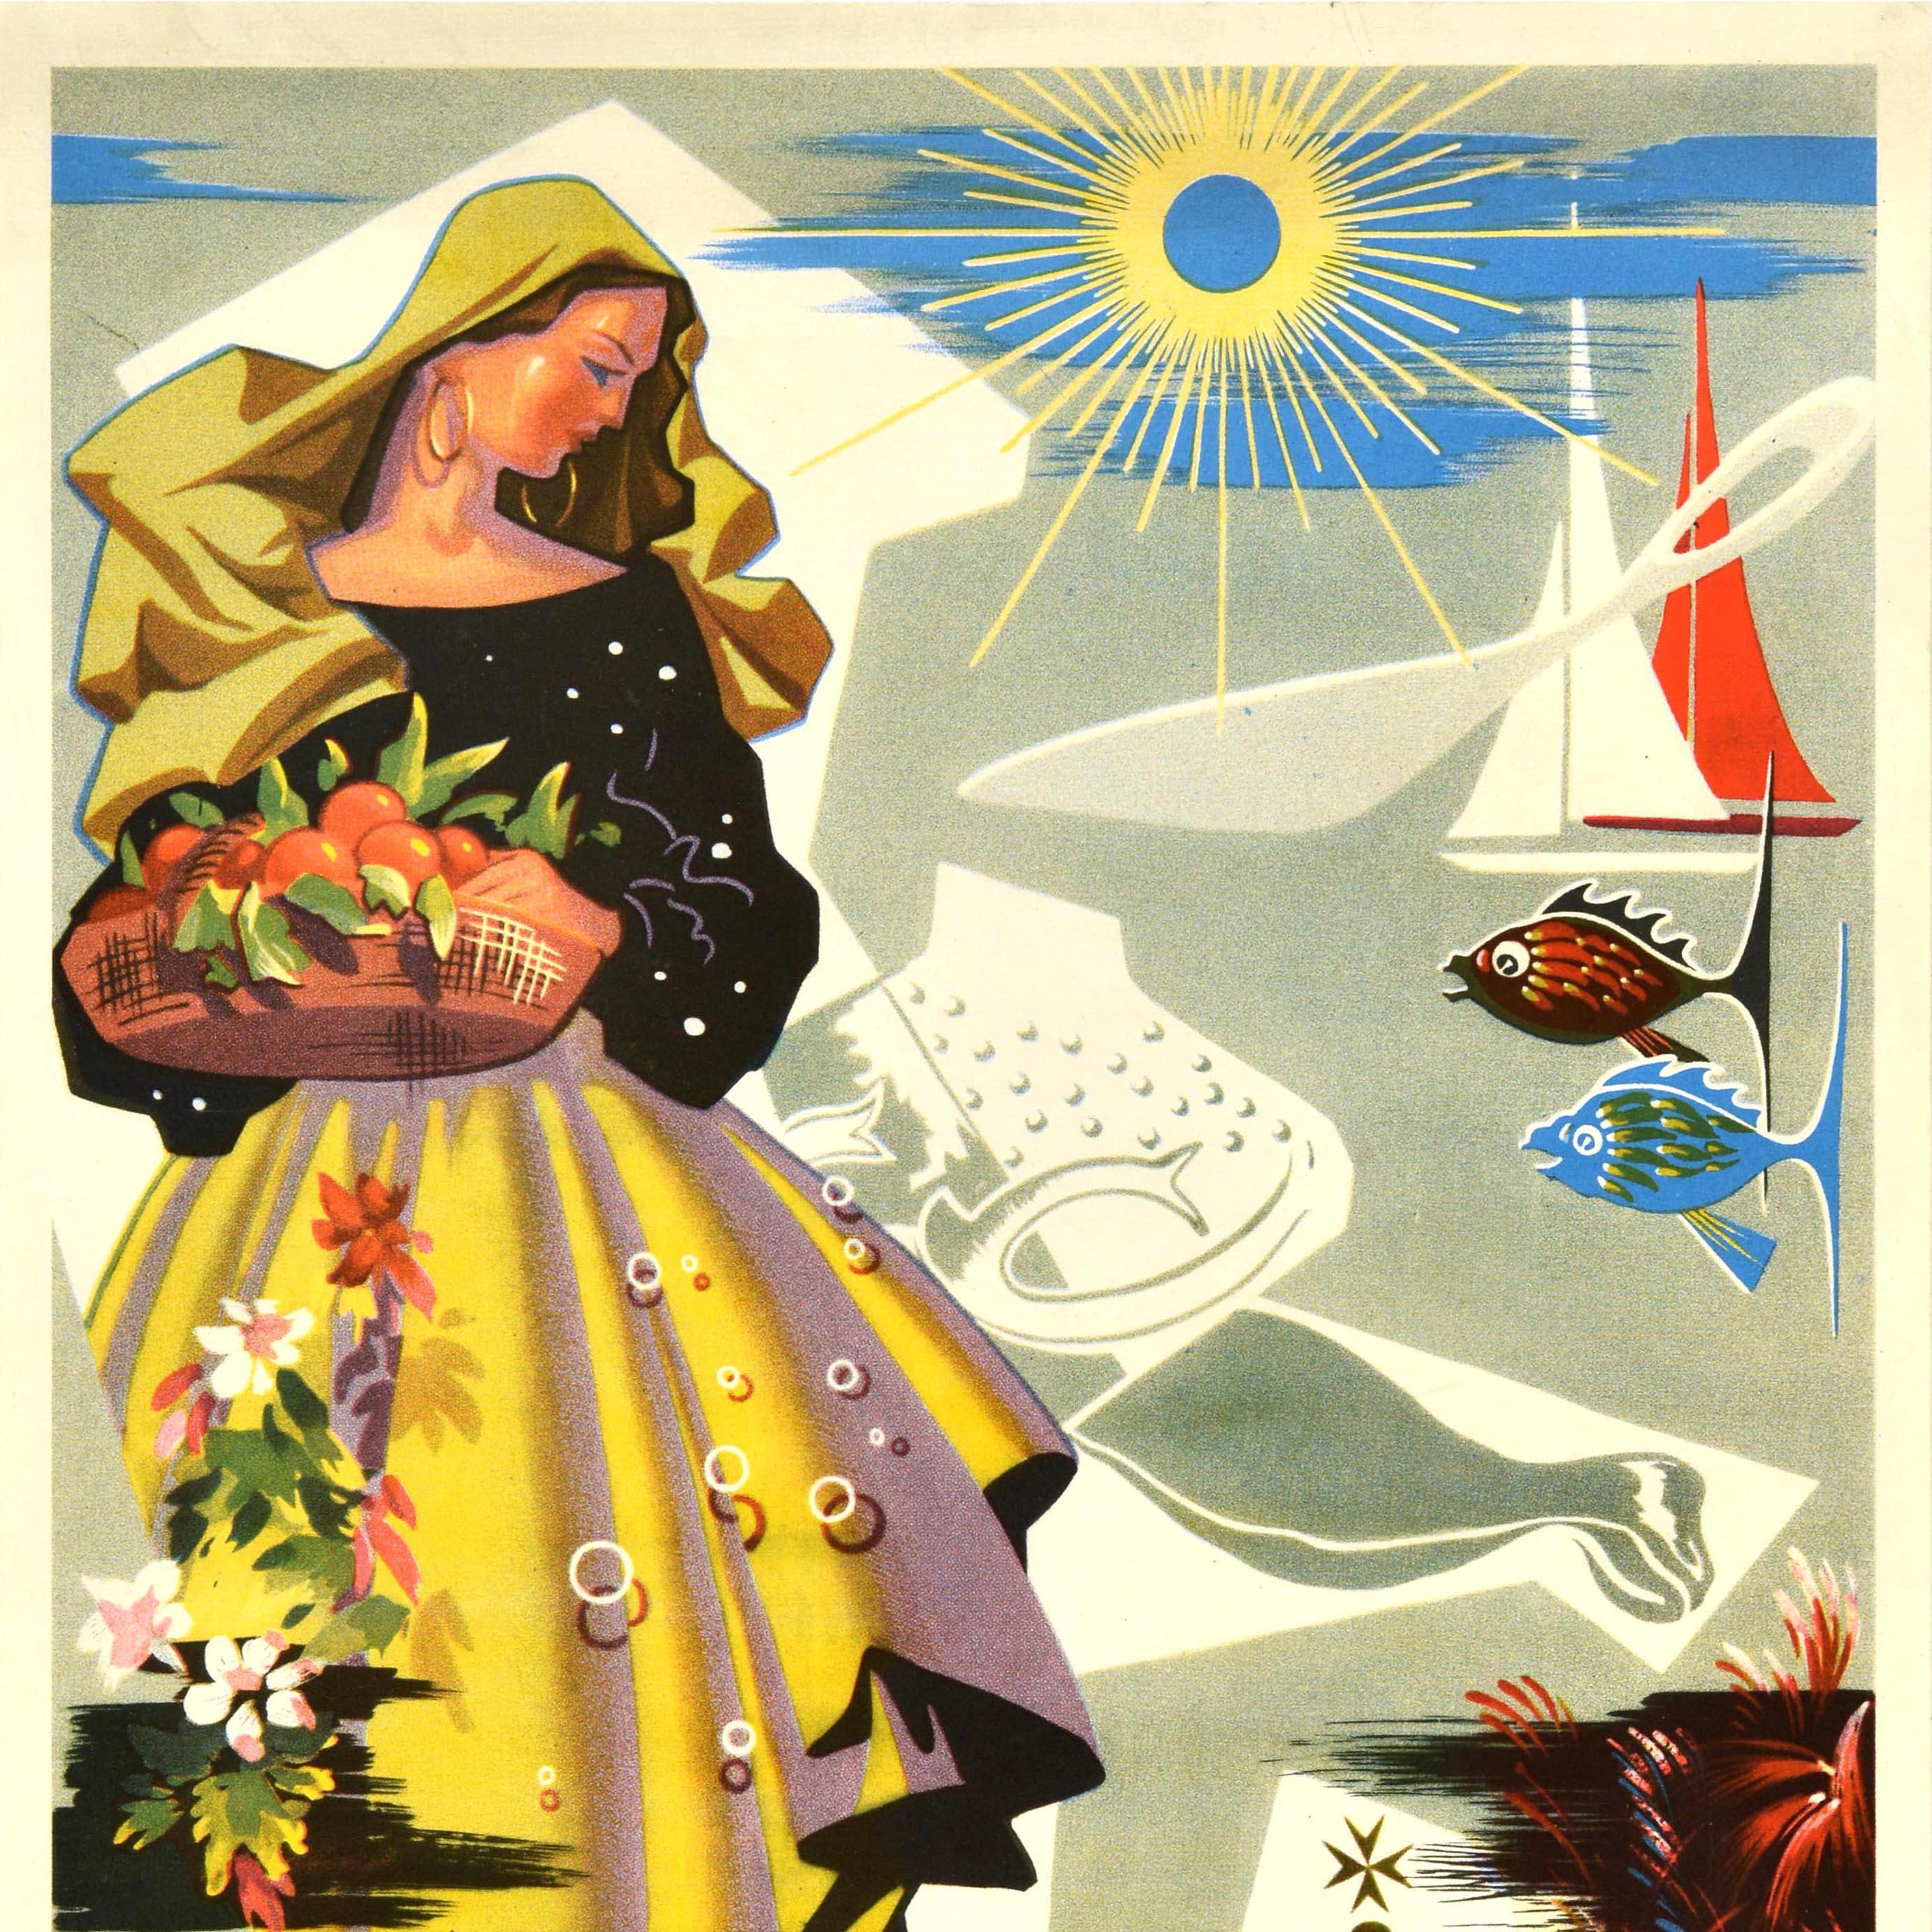 Original vintage travel poster for the island country of Malta located in the Mediterranean Sea featuring a colourful design with a lady wearing a traditional dress and head shawl holding a basket of oranges in front of a shining yellow sun and